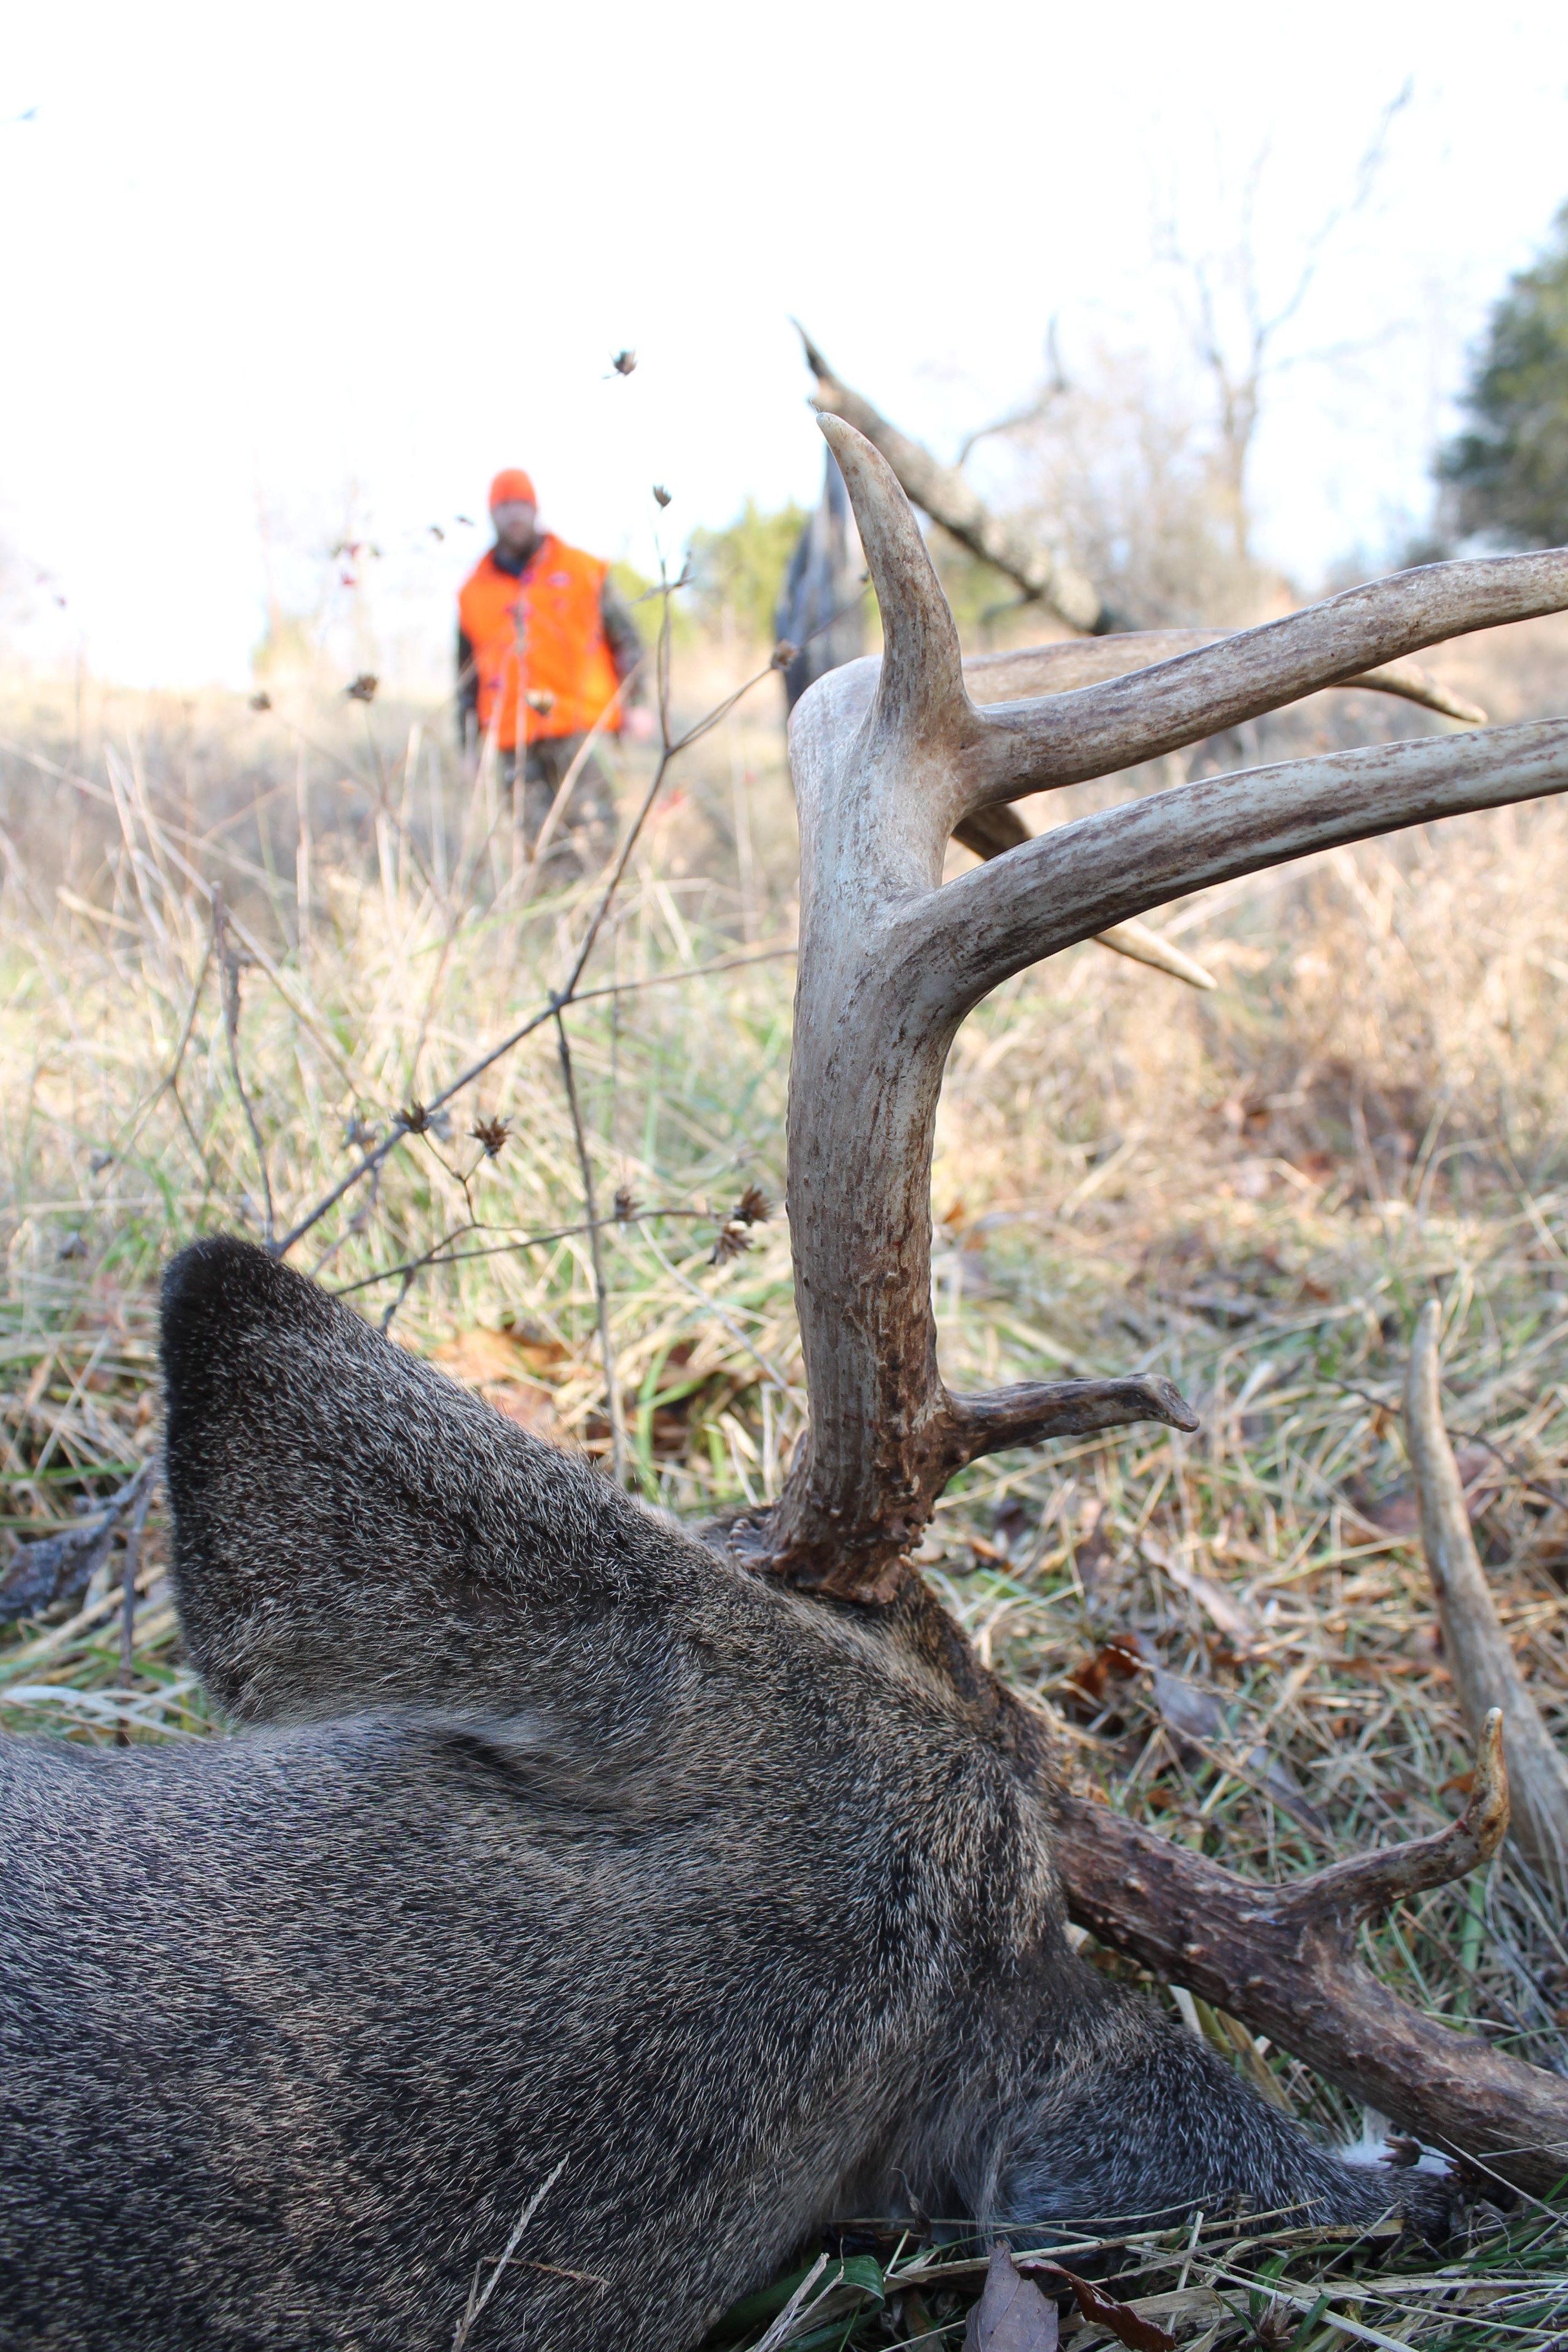 Deer hunting has a rich history and heritage. Protect it. (Josh Honeycutt photo)